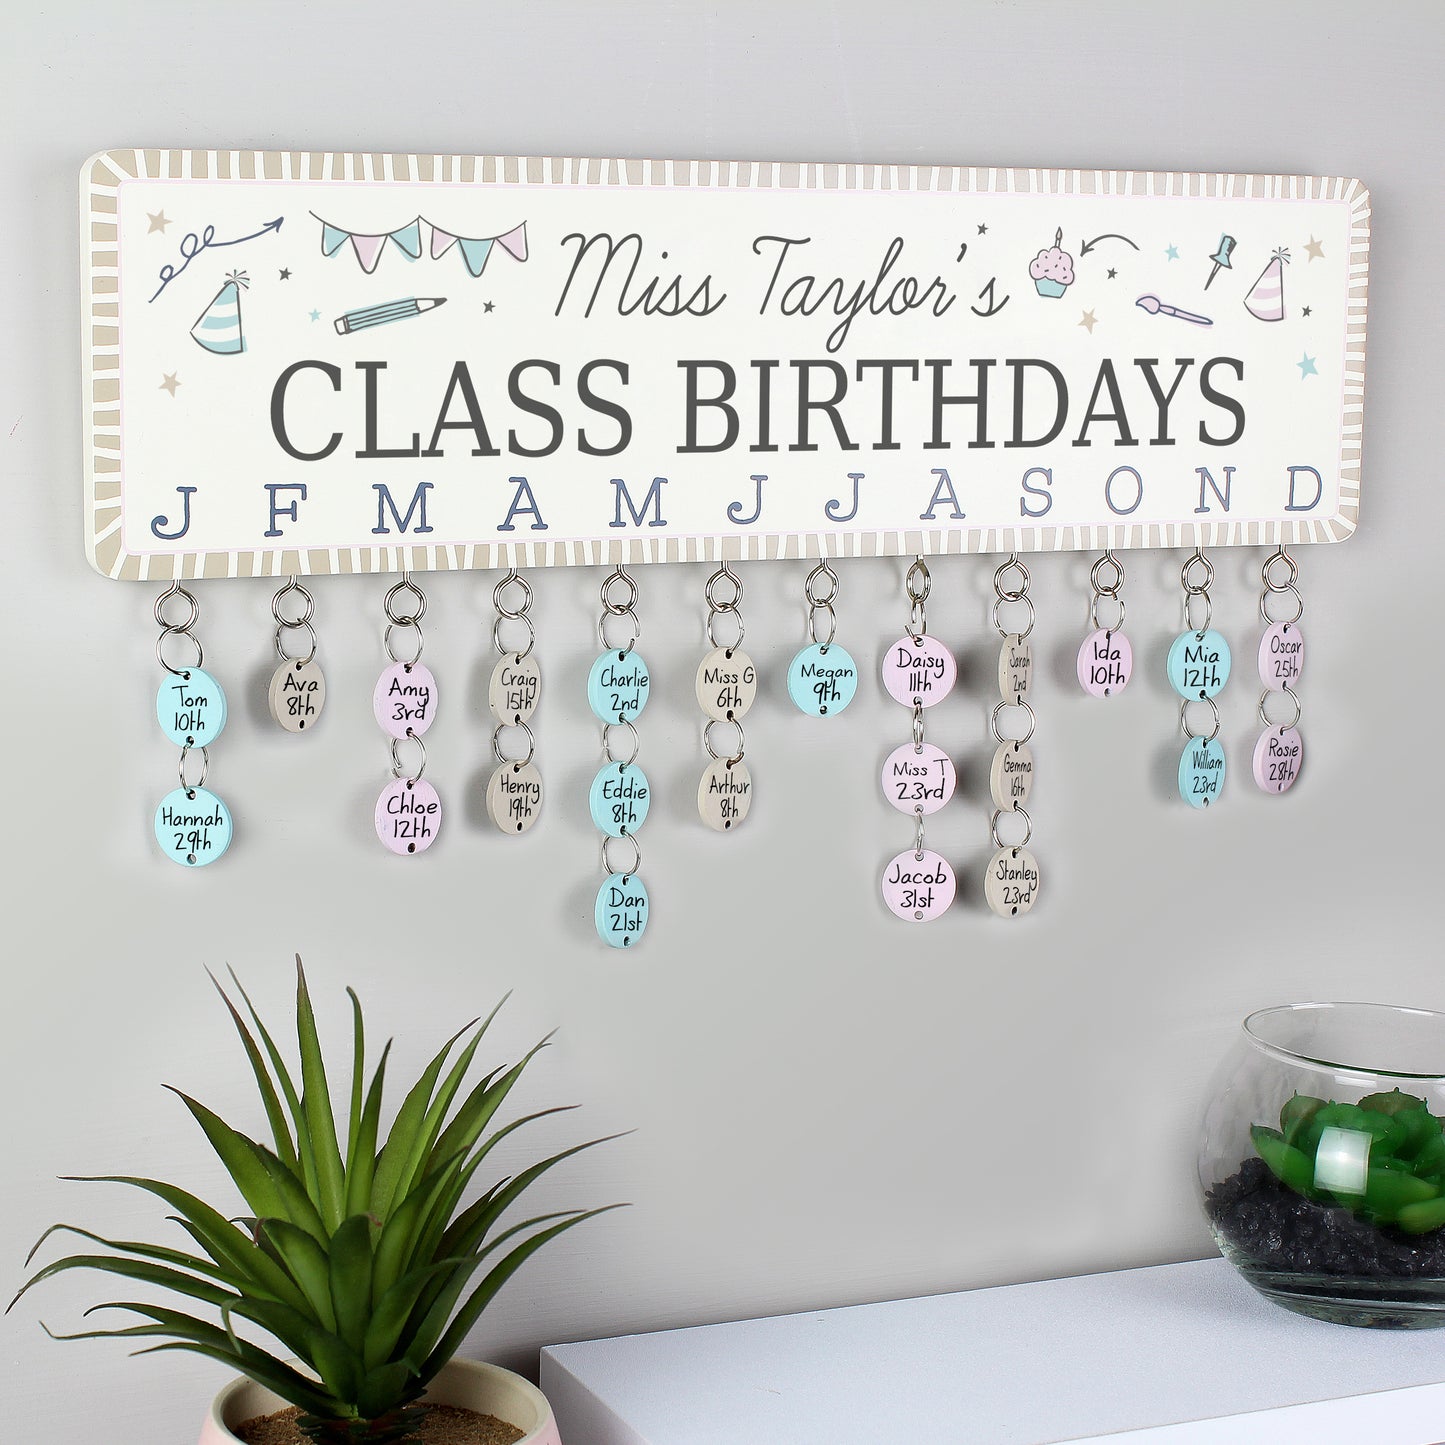 Personalised Classroom Office Birthday Planner Plaque with Customisable Discs - Personalise It!